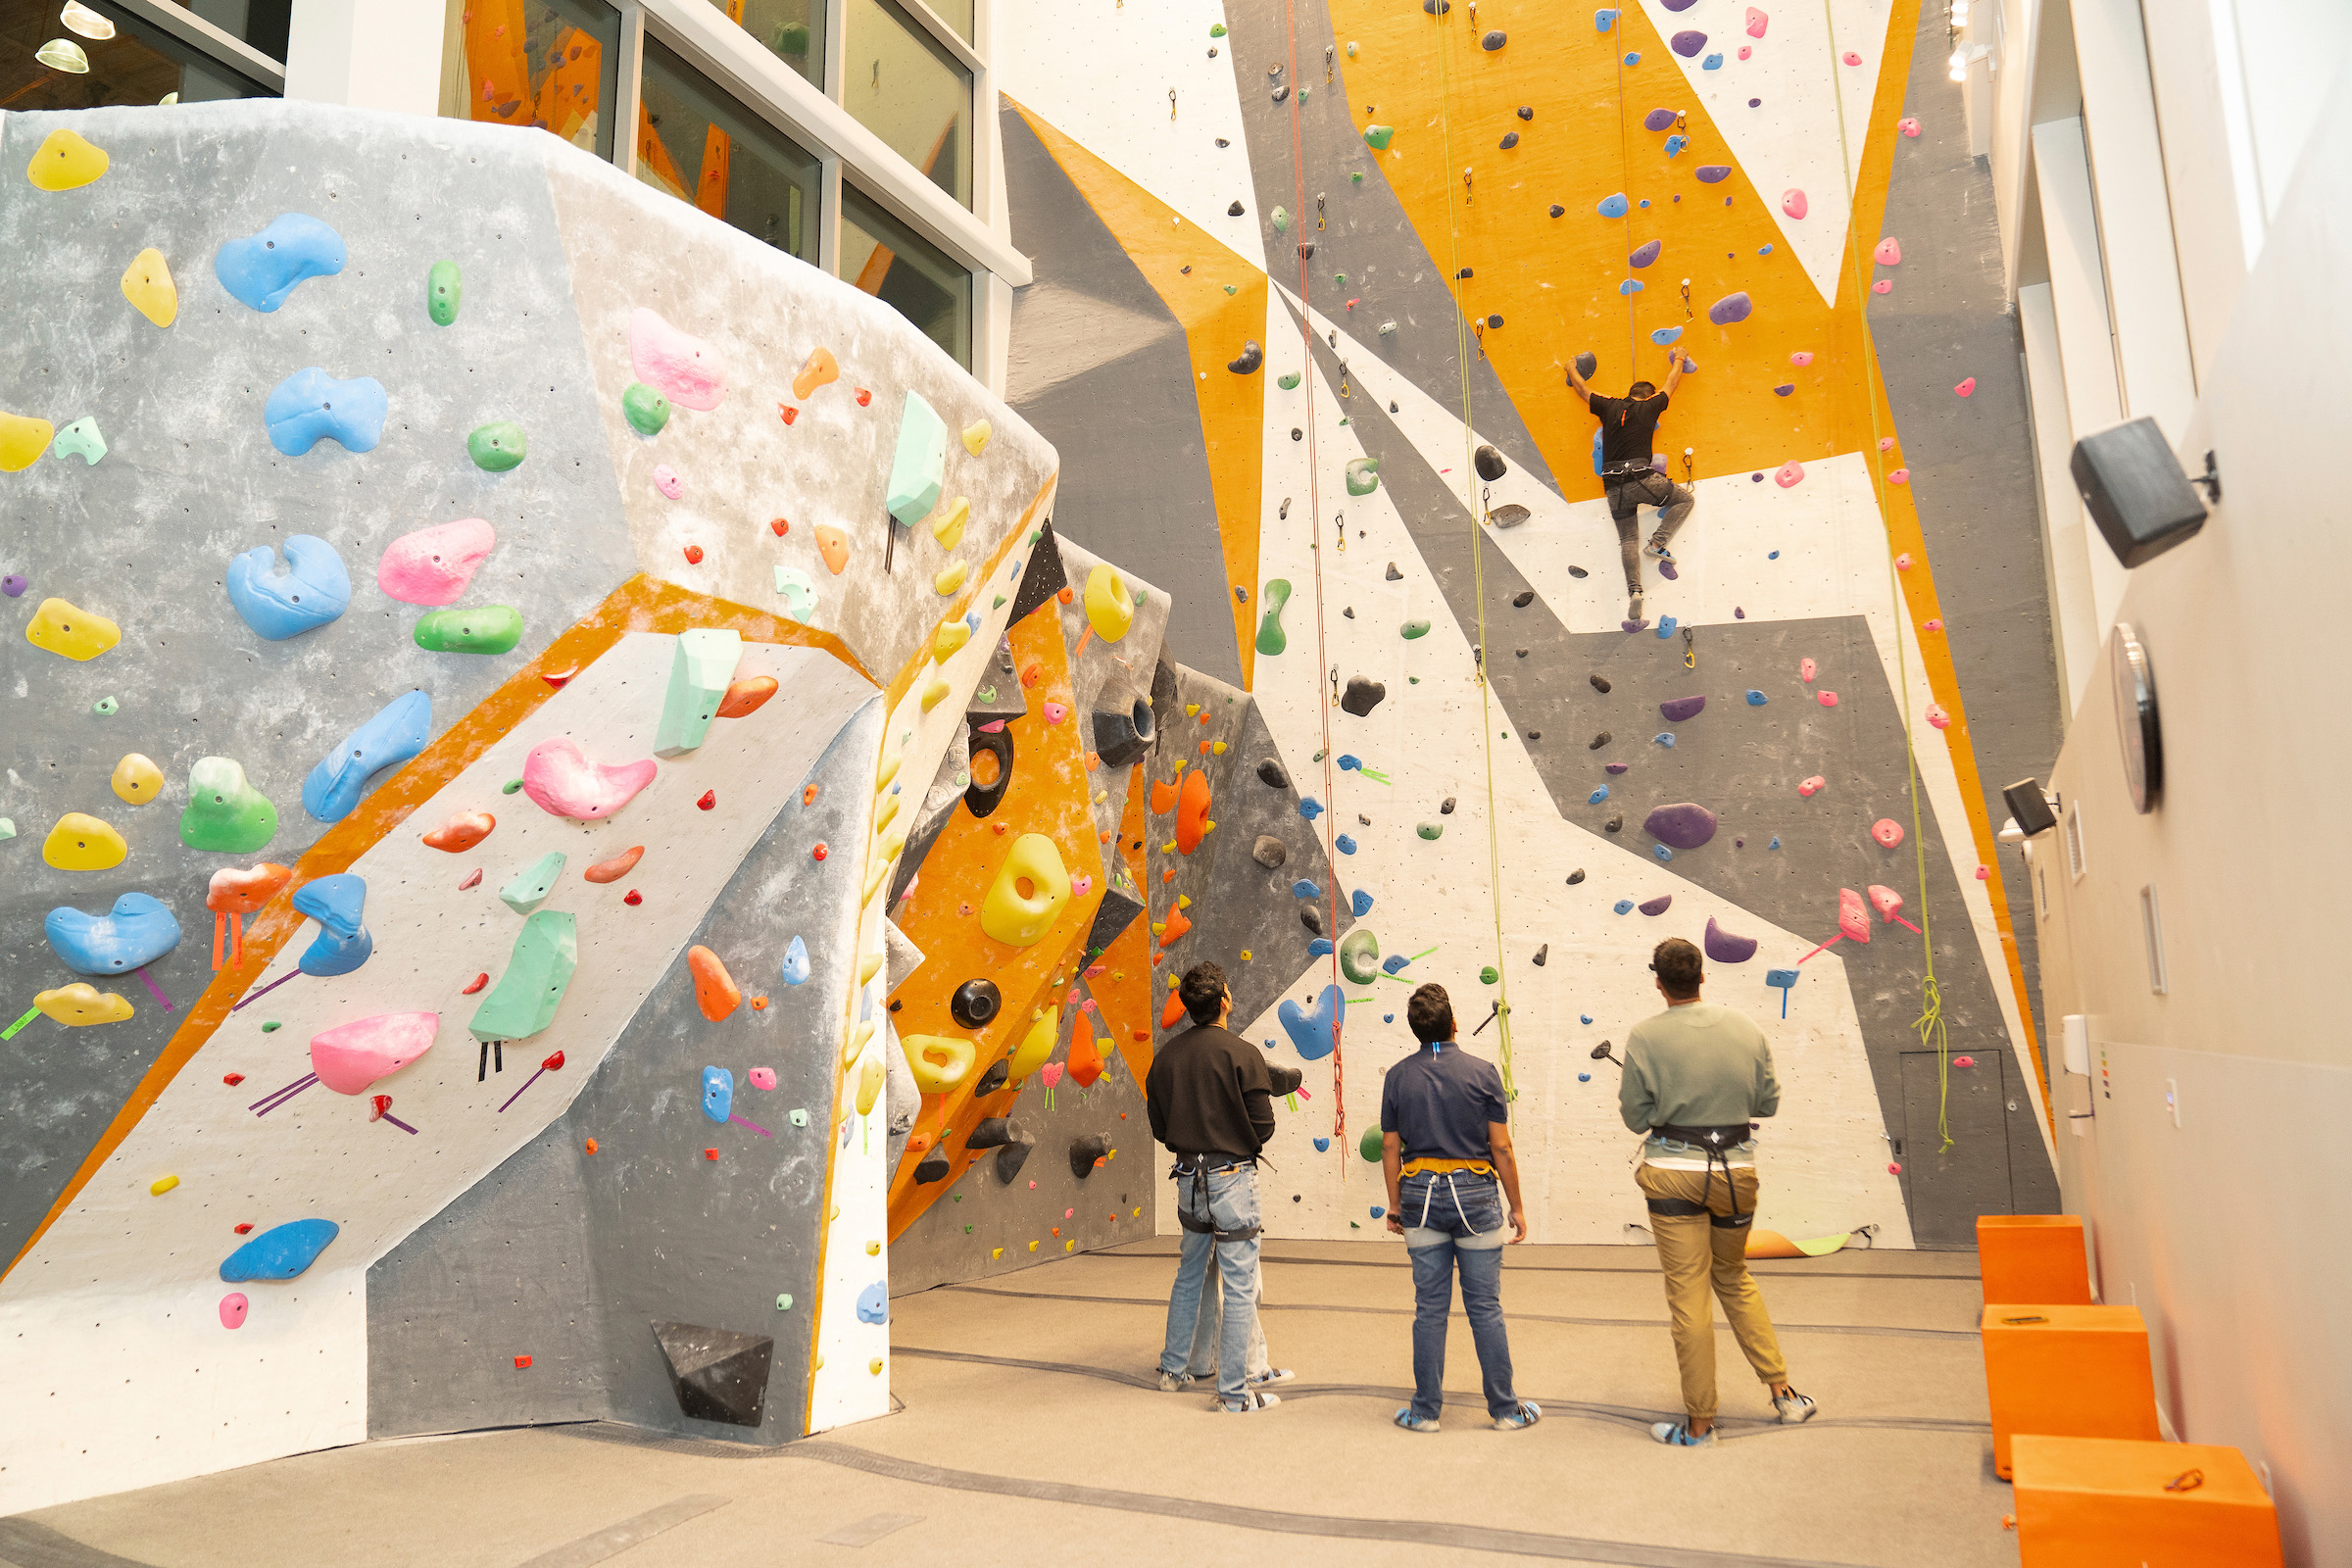 One individual climbing a rock wall, while three others stand by watching.